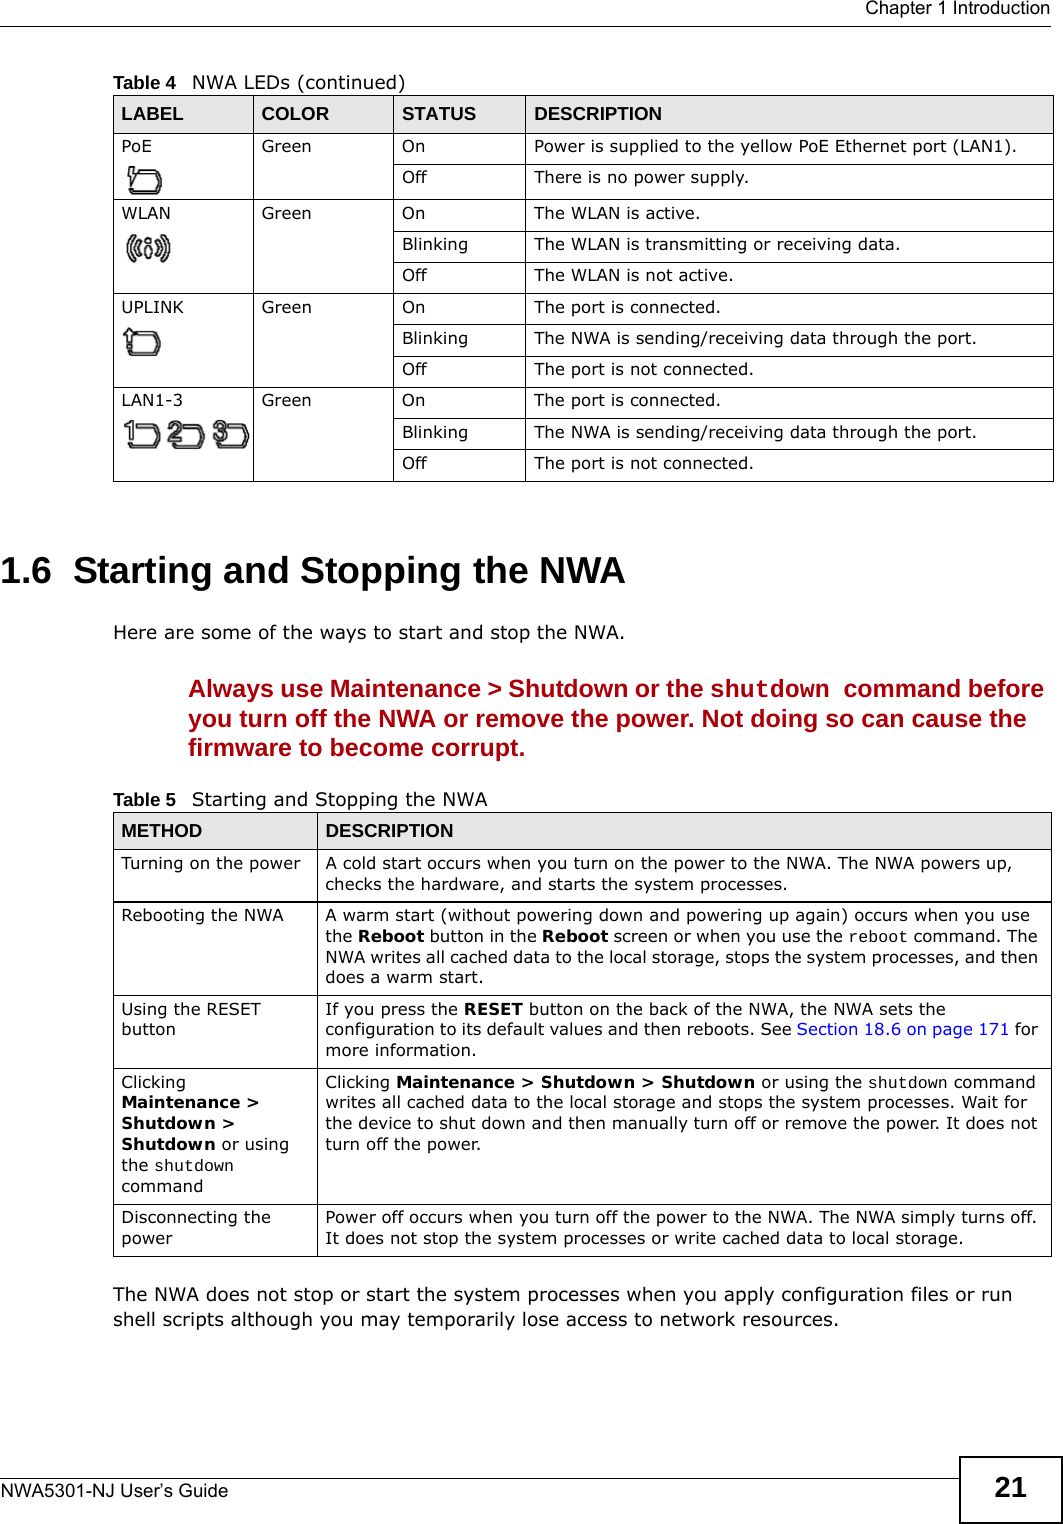  Chapter 1 IntroductionNWA5301-NJ User’s Guide 211.6  Starting and Stopping the NWAHere are some of the ways to start and stop the NWA.Always use Maintenance &gt; Shutdown or the shutdown command before you turn off the NWA or remove the power. Not doing so can cause the firmware to become corrupt.  The NWA does not stop or start the system processes when you apply configuration files or run shell scripts although you may temporarily lose access to network resources.PoE Green On Power is supplied to the yellow PoE Ethernet port (LAN1).Off There is no power supply.WLAN Green On The WLAN is active.Blinking The WLAN is transmitting or receiving data.Off The WLAN is not active.UPLINK Green On The port is connected.Blinking The NWA is sending/receiving data through the port.Off The port is not connected. LAN1-3 Green On The port is connected.Blinking The NWA is sending/receiving data through the port.Off The port is not connected.Table 4   NWA LEDs (continued)LABEL COLOR STATUS DESCRIPTIONTable 5   Starting and Stopping the NWAMETHOD DESCRIPTIONTurning on the power A cold start occurs when you turn on the power to the NWA. The NWA powers up, checks the hardware, and starts the system processes.Rebooting the NWA A warm start (without powering down and powering up again) occurs when you use the Reboot button in the Reboot screen or when you use the reboot command. The NWA writes all cached data to the local storage, stops the system processes, and then does a warm start. Using the RESET buttonIf you press the RESET button on the back of the NWA, the NWA sets the configuration to its default values and then reboots. See Section 18.6 on page 171 for more information.Clicking Maintenance &gt; Shutdown &gt; Shutdown or using the shutdown commandClicking Maintenance &gt; Shutdown &gt; Shutdown or using the shutdown command writes all cached data to the local storage and stops the system processes. Wait for the device to shut down and then manually turn off or remove the power. It does not turn off the power. Disconnecting the powerPower off occurs when you turn off the power to the NWA. The NWA simply turns off. It does not stop the system processes or write cached data to local storage. 